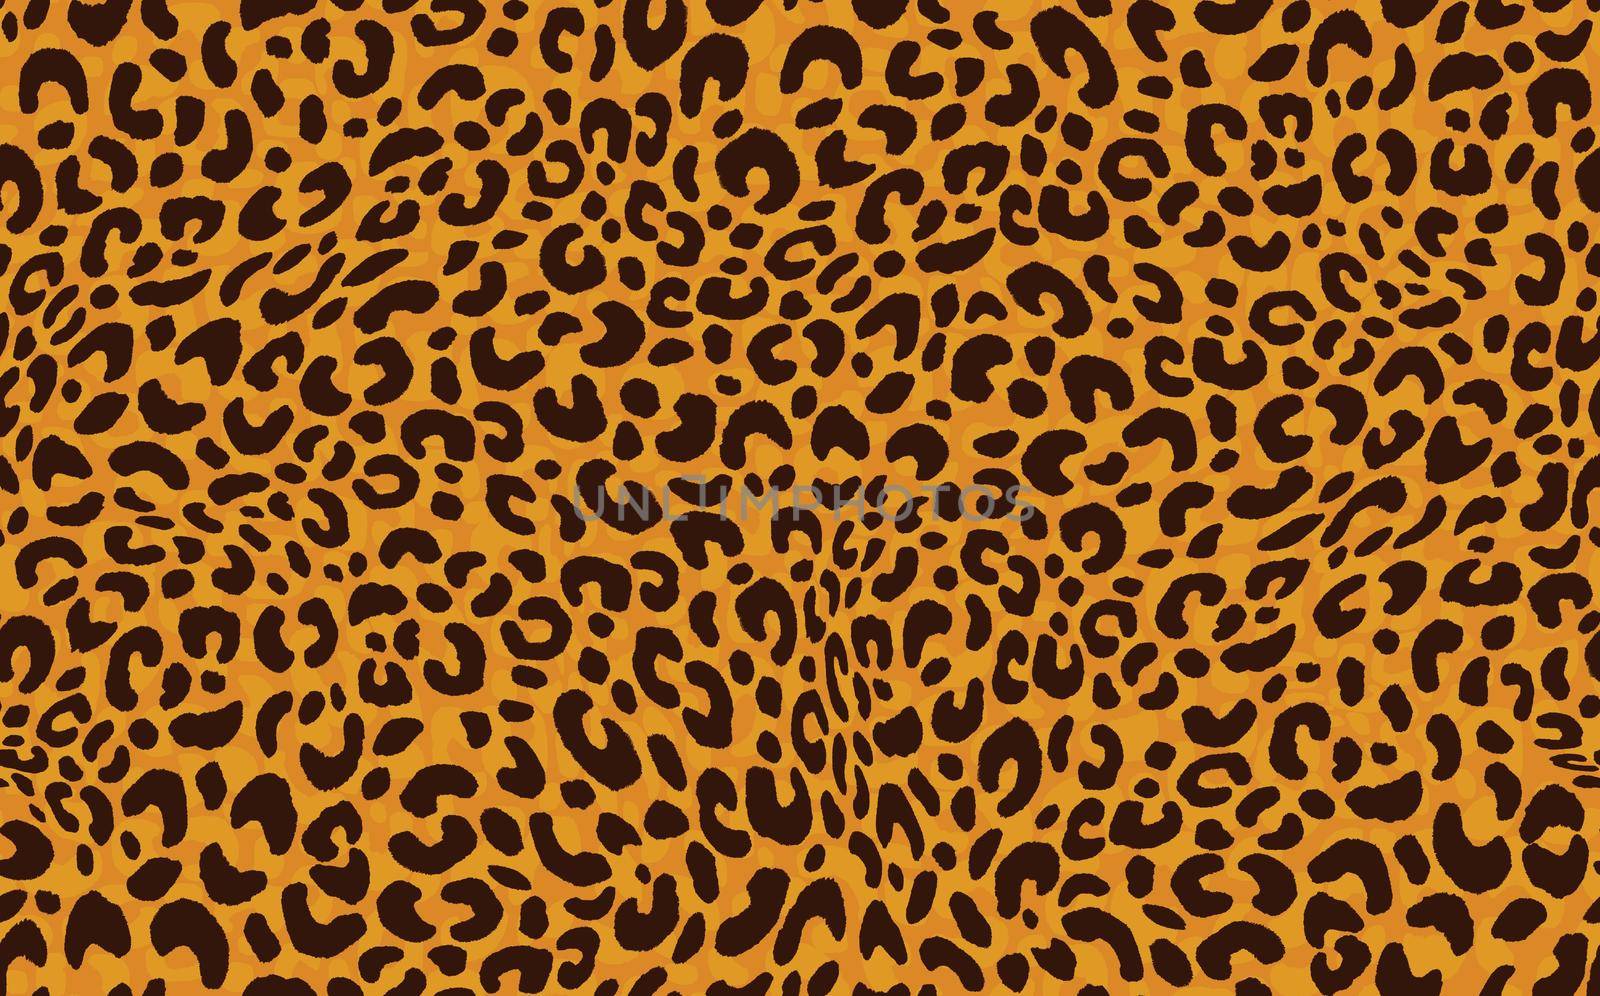 Abstract modern leopard seamless pattern. Animals trendy background. Orange and brown decorative vector stock illustration for print, card, postcard, fabric, textile. Modern ornament of stylized skin